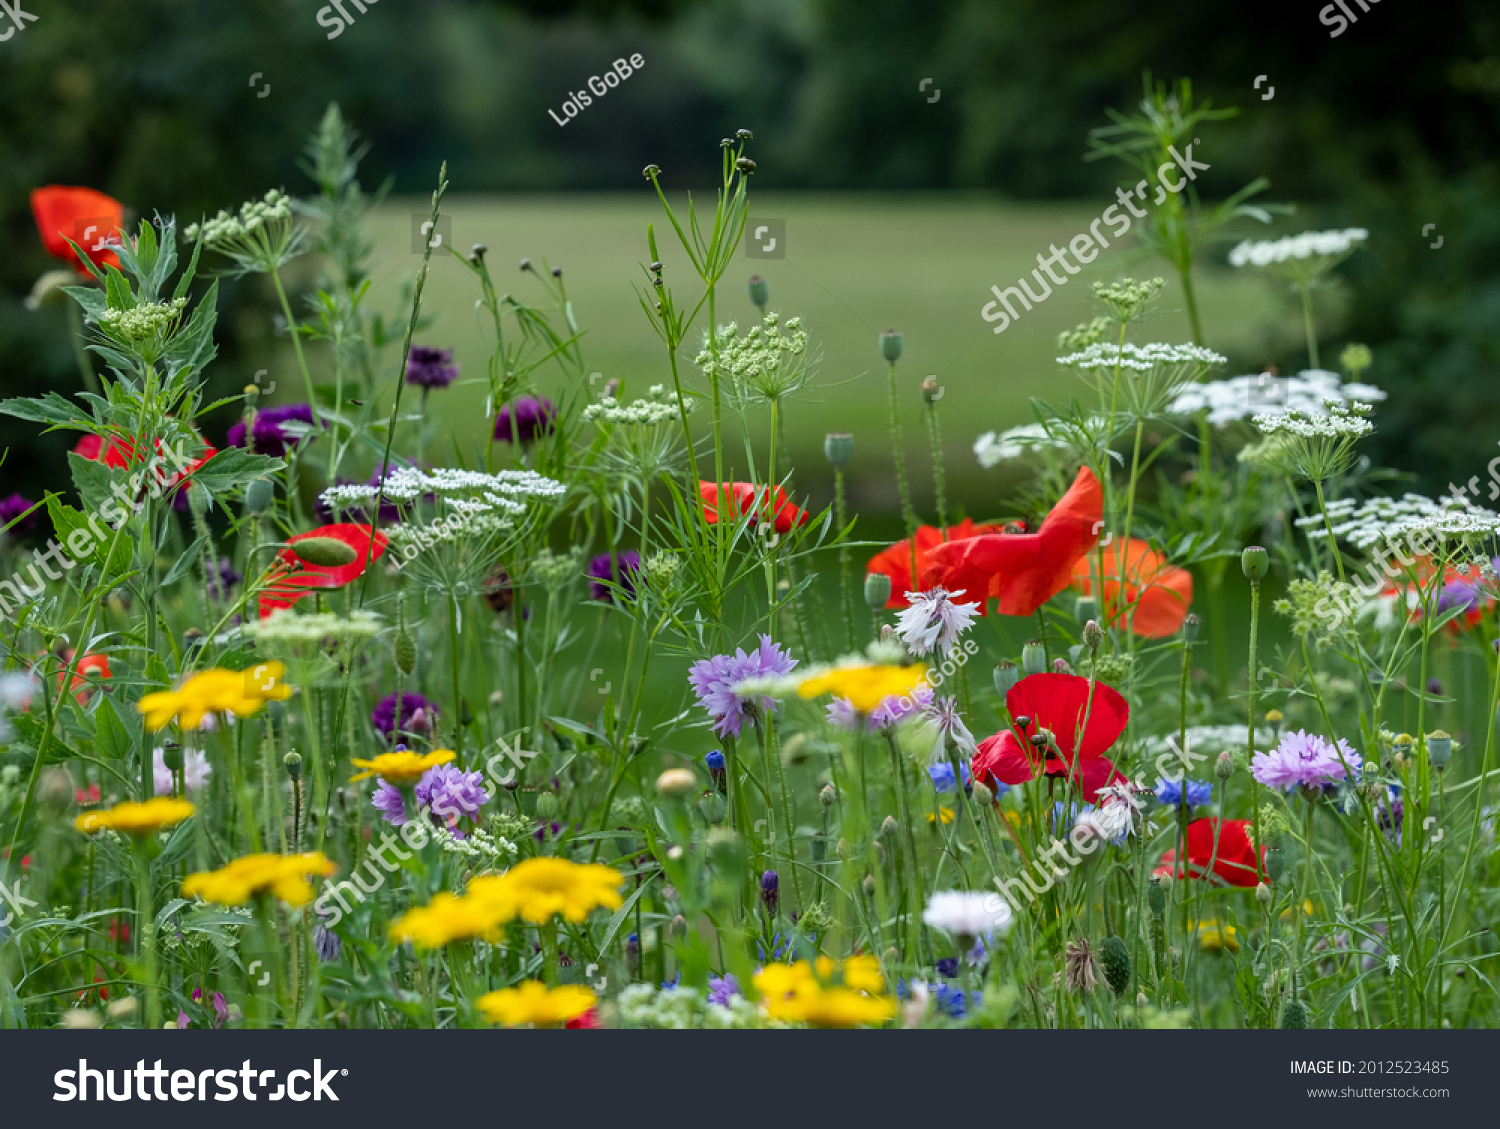 Variety of colourful wild flowers including corn marigold and poppies growing in the grass in Pinn Meadows conservation area, Eastcote, Hillingdon, in the London suburbs, UK.  #2012523485